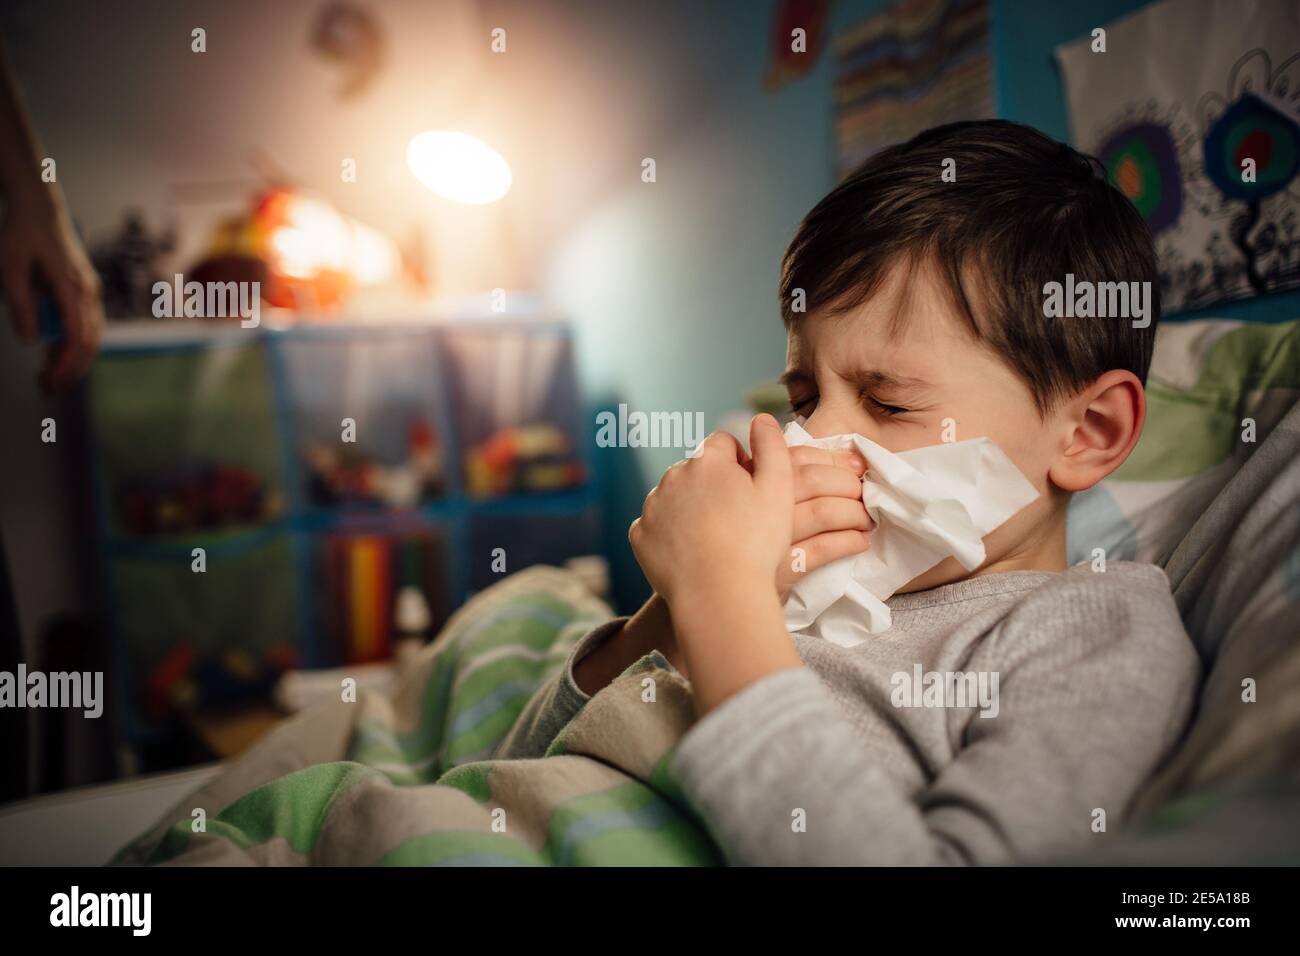 A portrait of a sick child with the flu clearing his stuffy nose. A boy lying in bed blowing his nose. Stock Photo